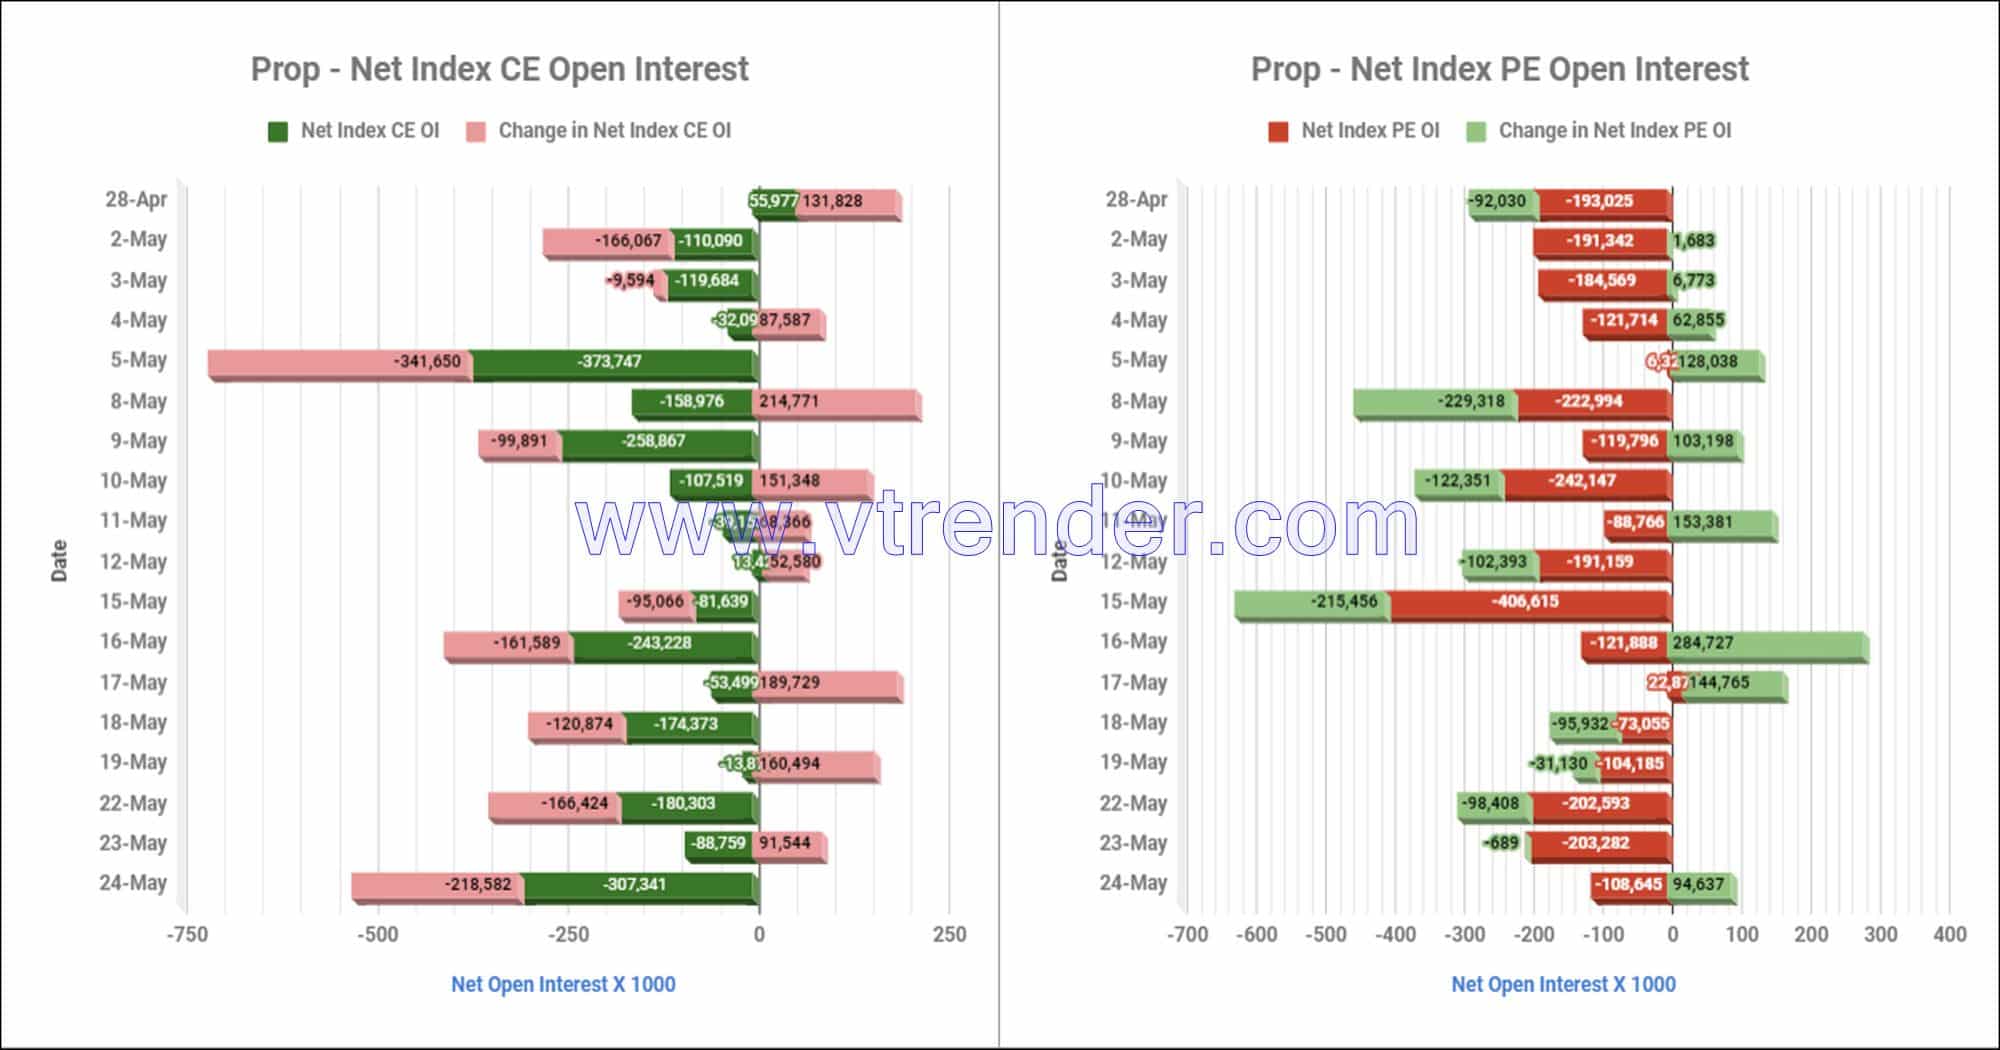 Proinop24May Participantwise Net Open Interest And Net Equity Investments – 24Th May 2023 Client, Equity, Fii, Index Futures, Index Options, Open Interest, Prop